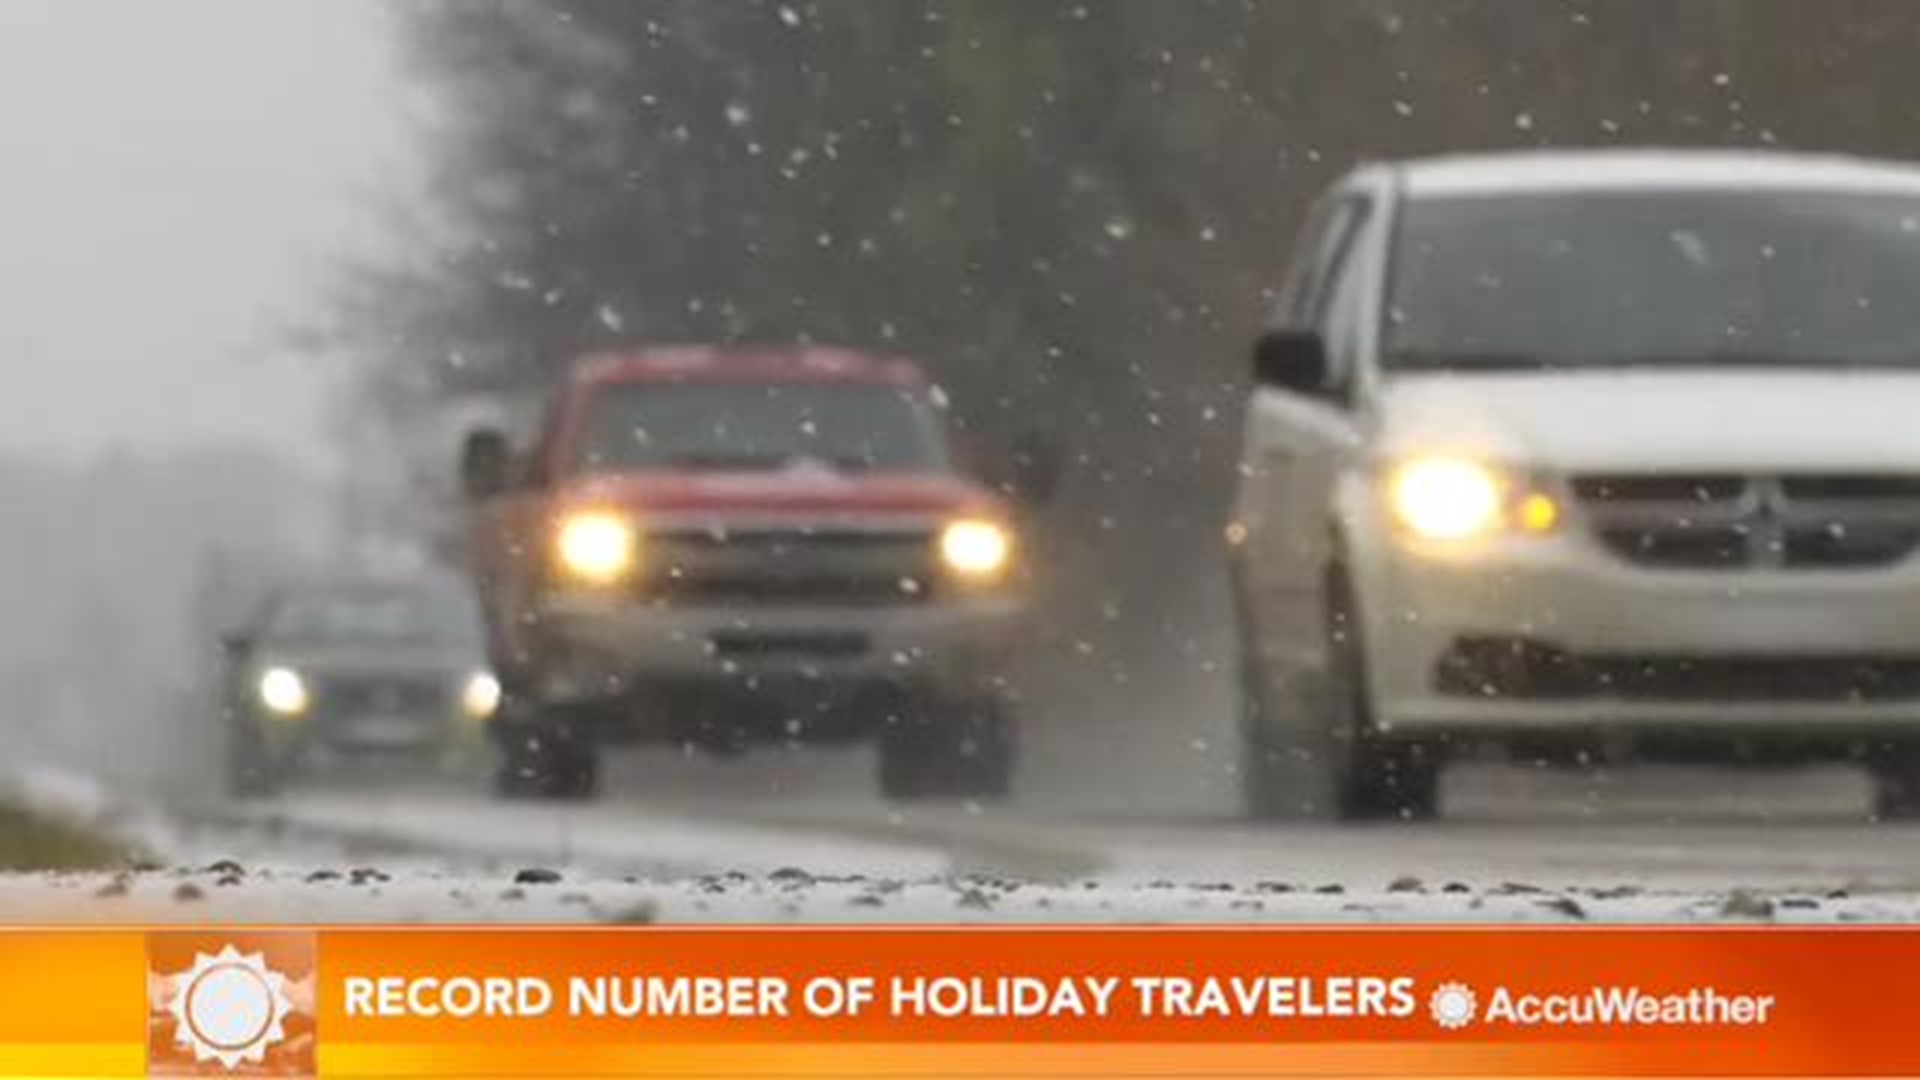 Powerful storms could cause trouble for the record number of Americans traveling for the holiday.